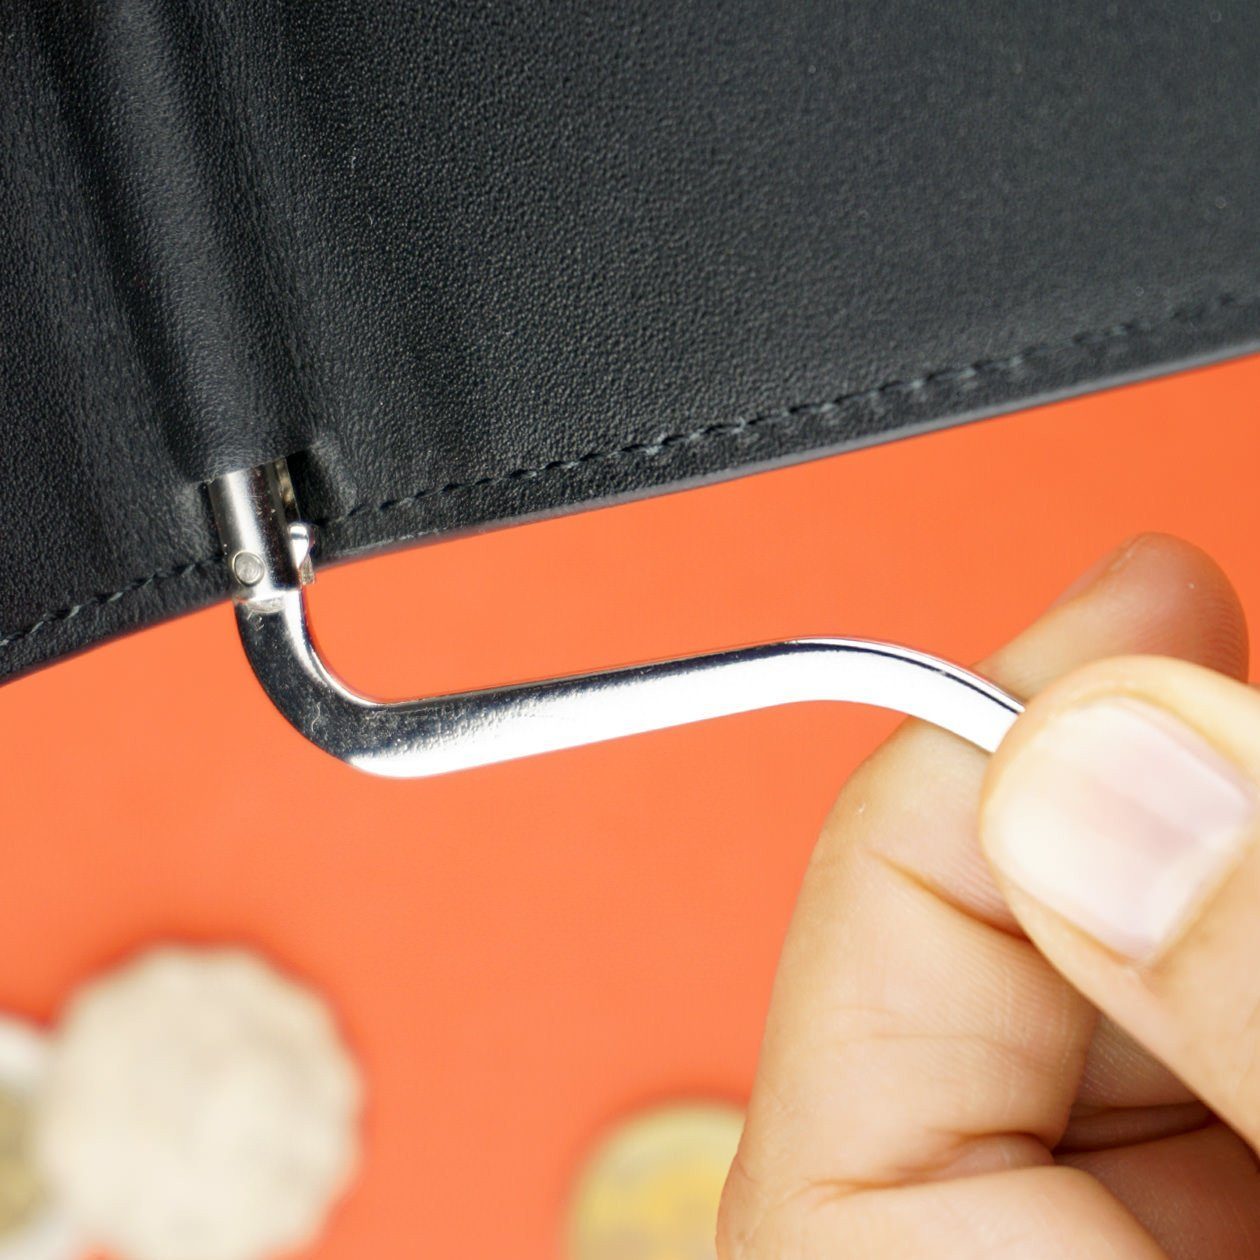 index and thumb holding an adjustable money clip attached to a black wallet